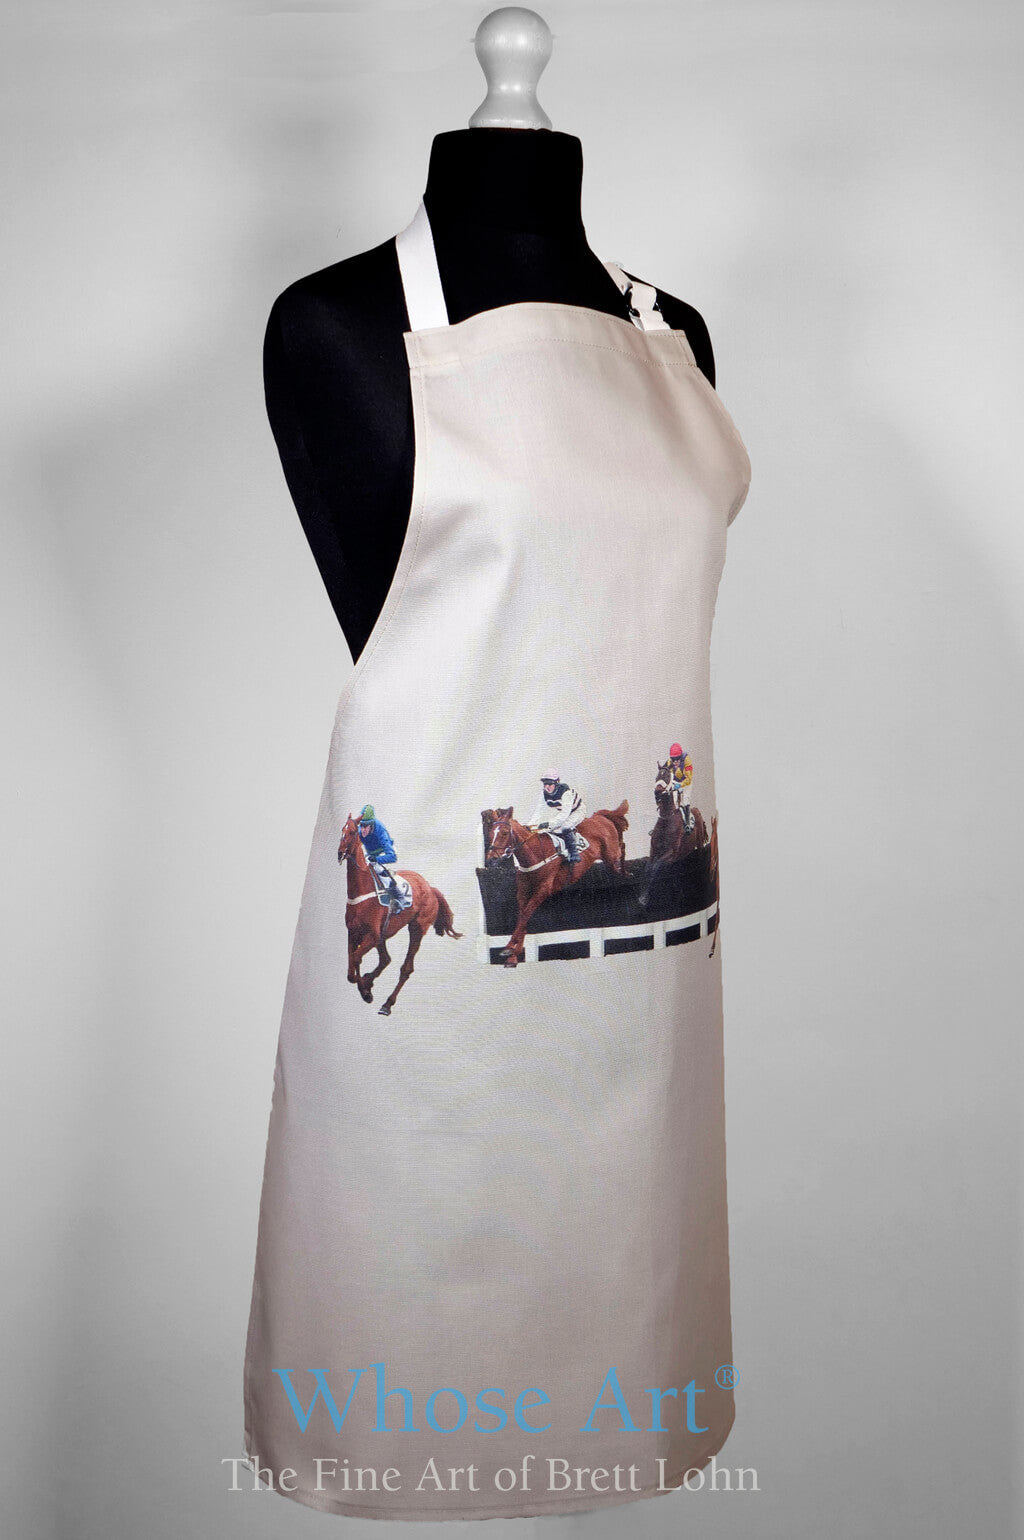 cheltenham racecourse gift idea apron with horses racing pictured on the front